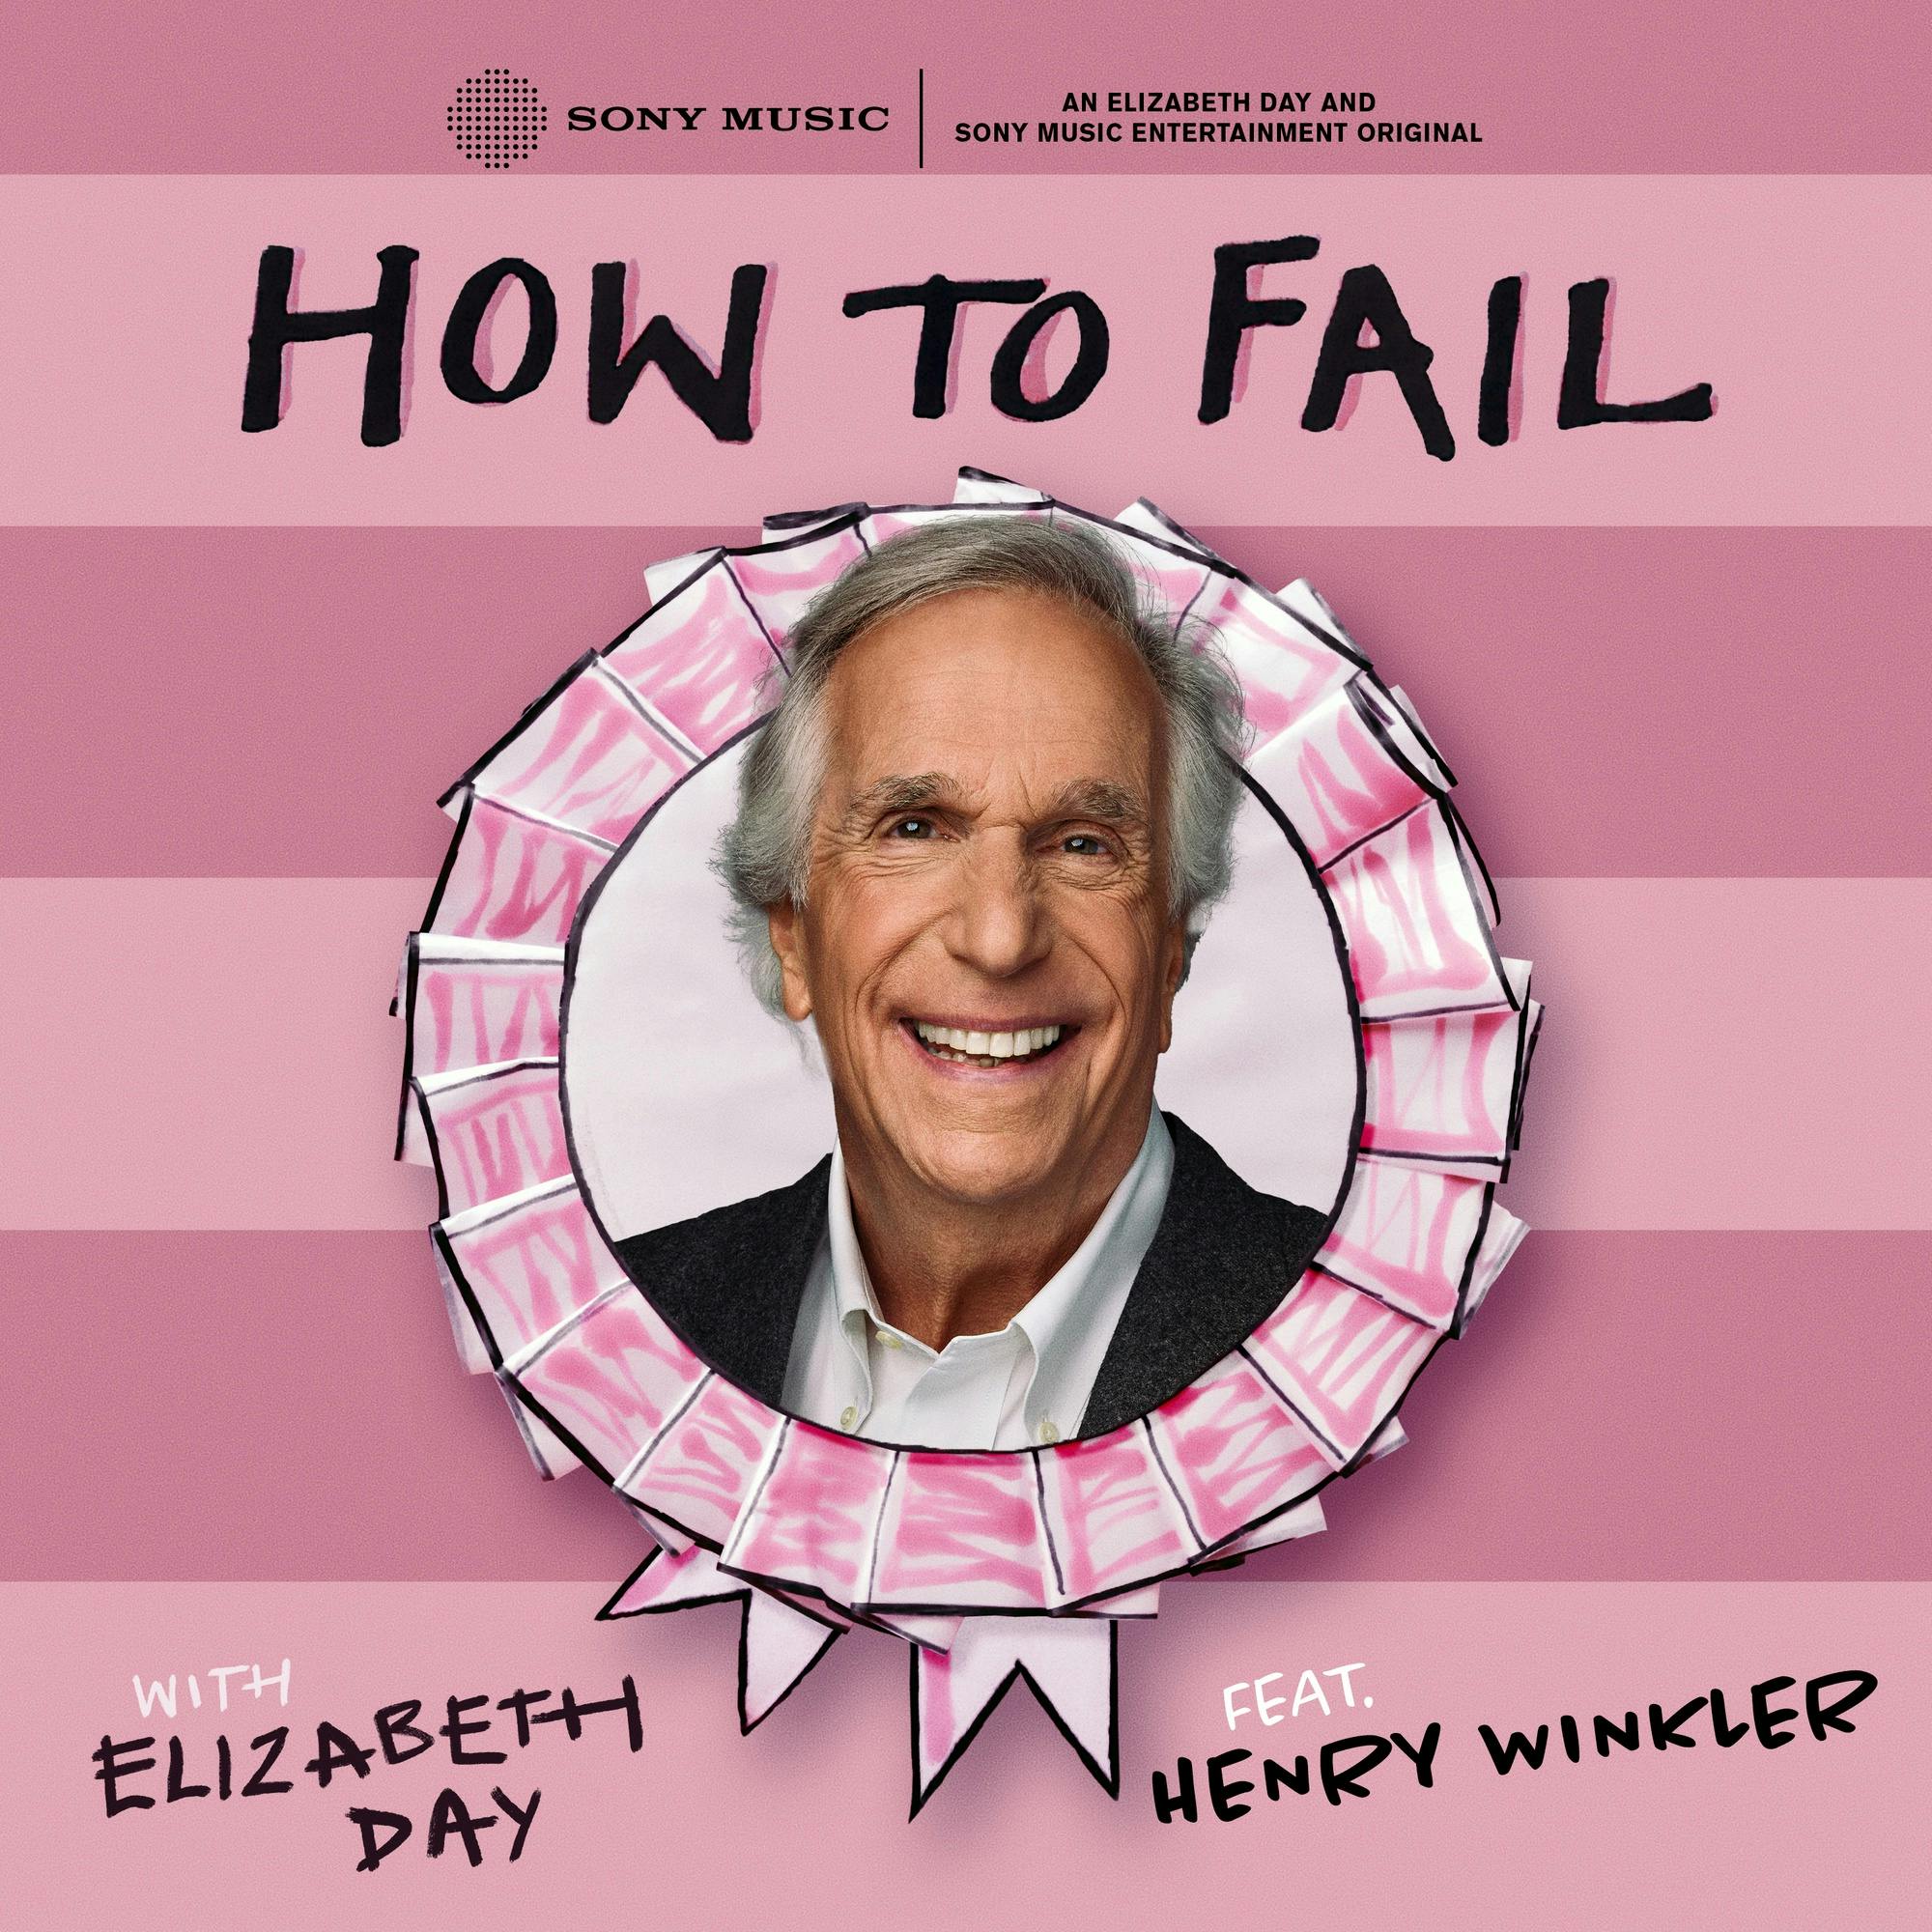 Henry Winkler - The Fonz, Getting Fired and Listening To Your Gut